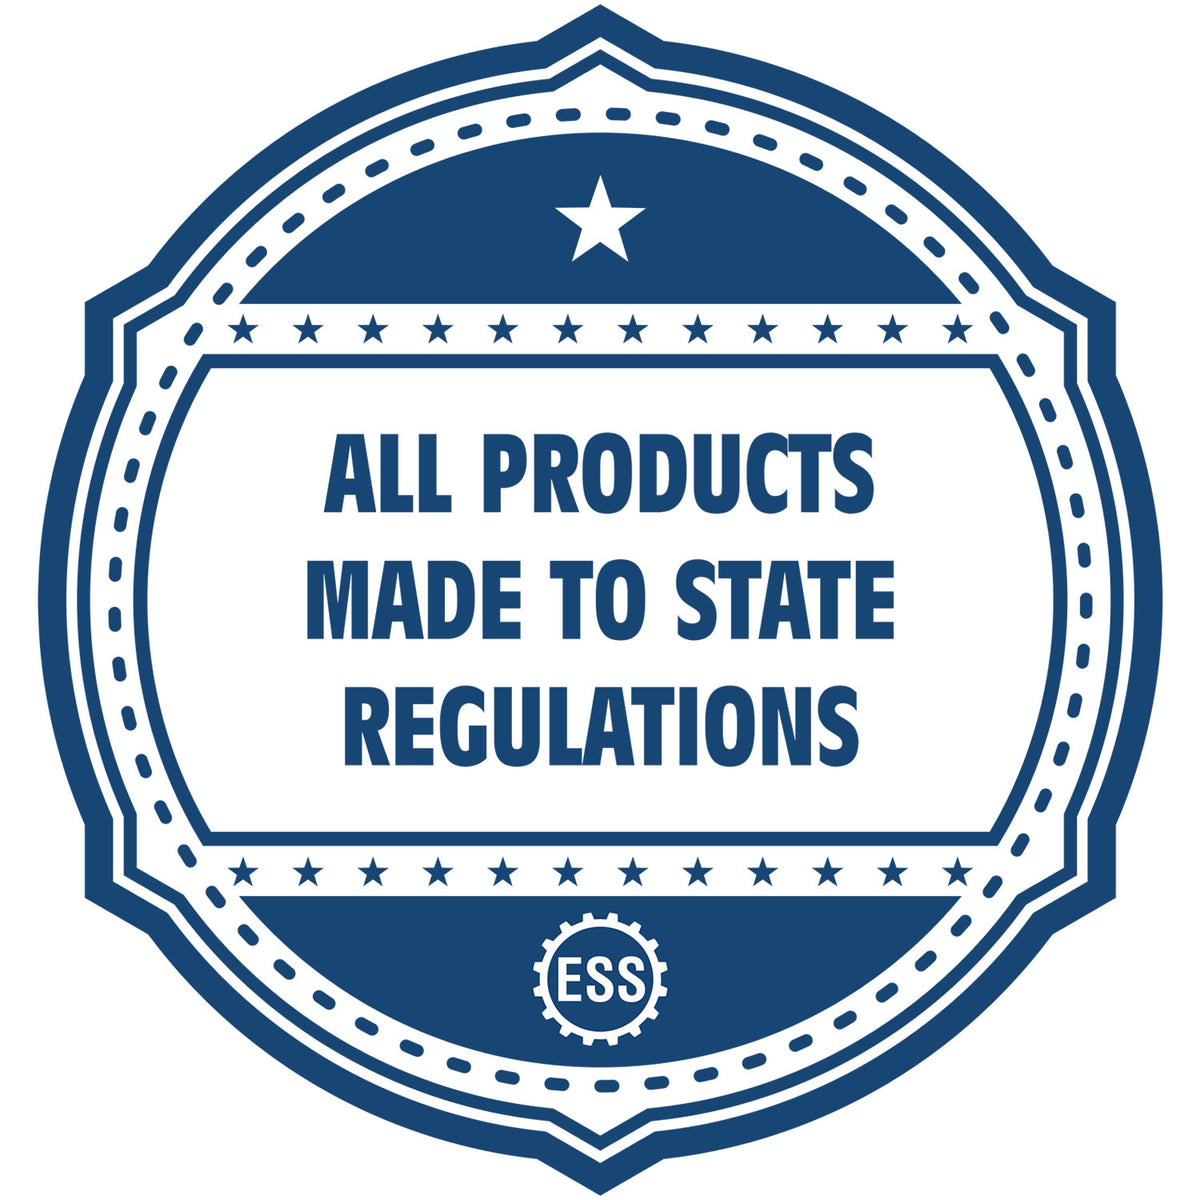 An icon or badge element for the Super Slim New Hampshire Notary Public Stamp showing that this product is made in compliance with state regulations.